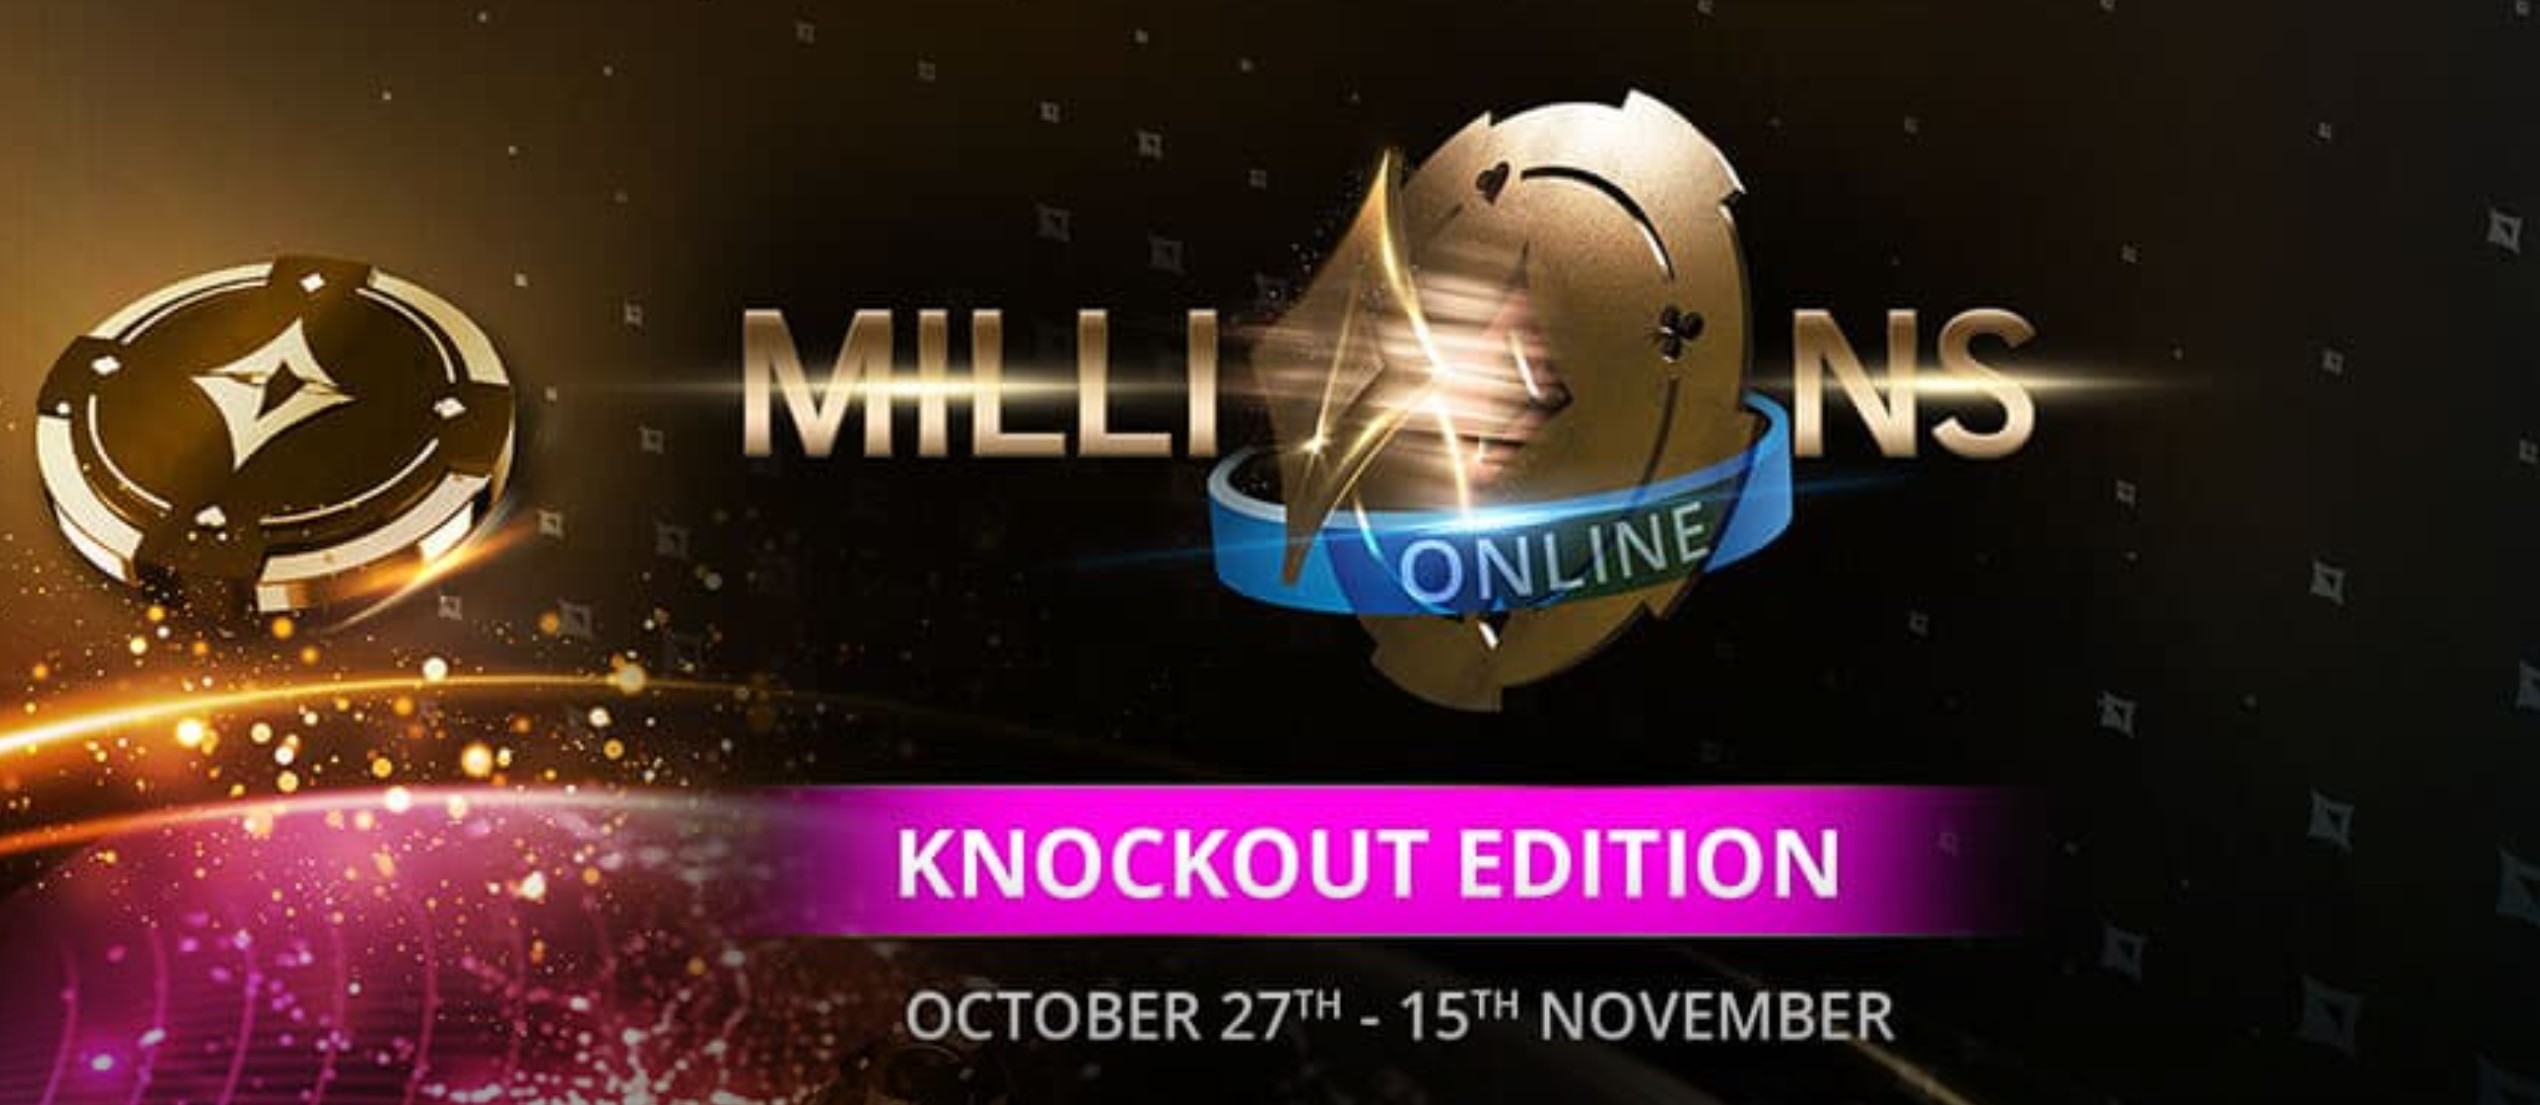 Partypoker\: MILLIONS Online KO Launches October 27th